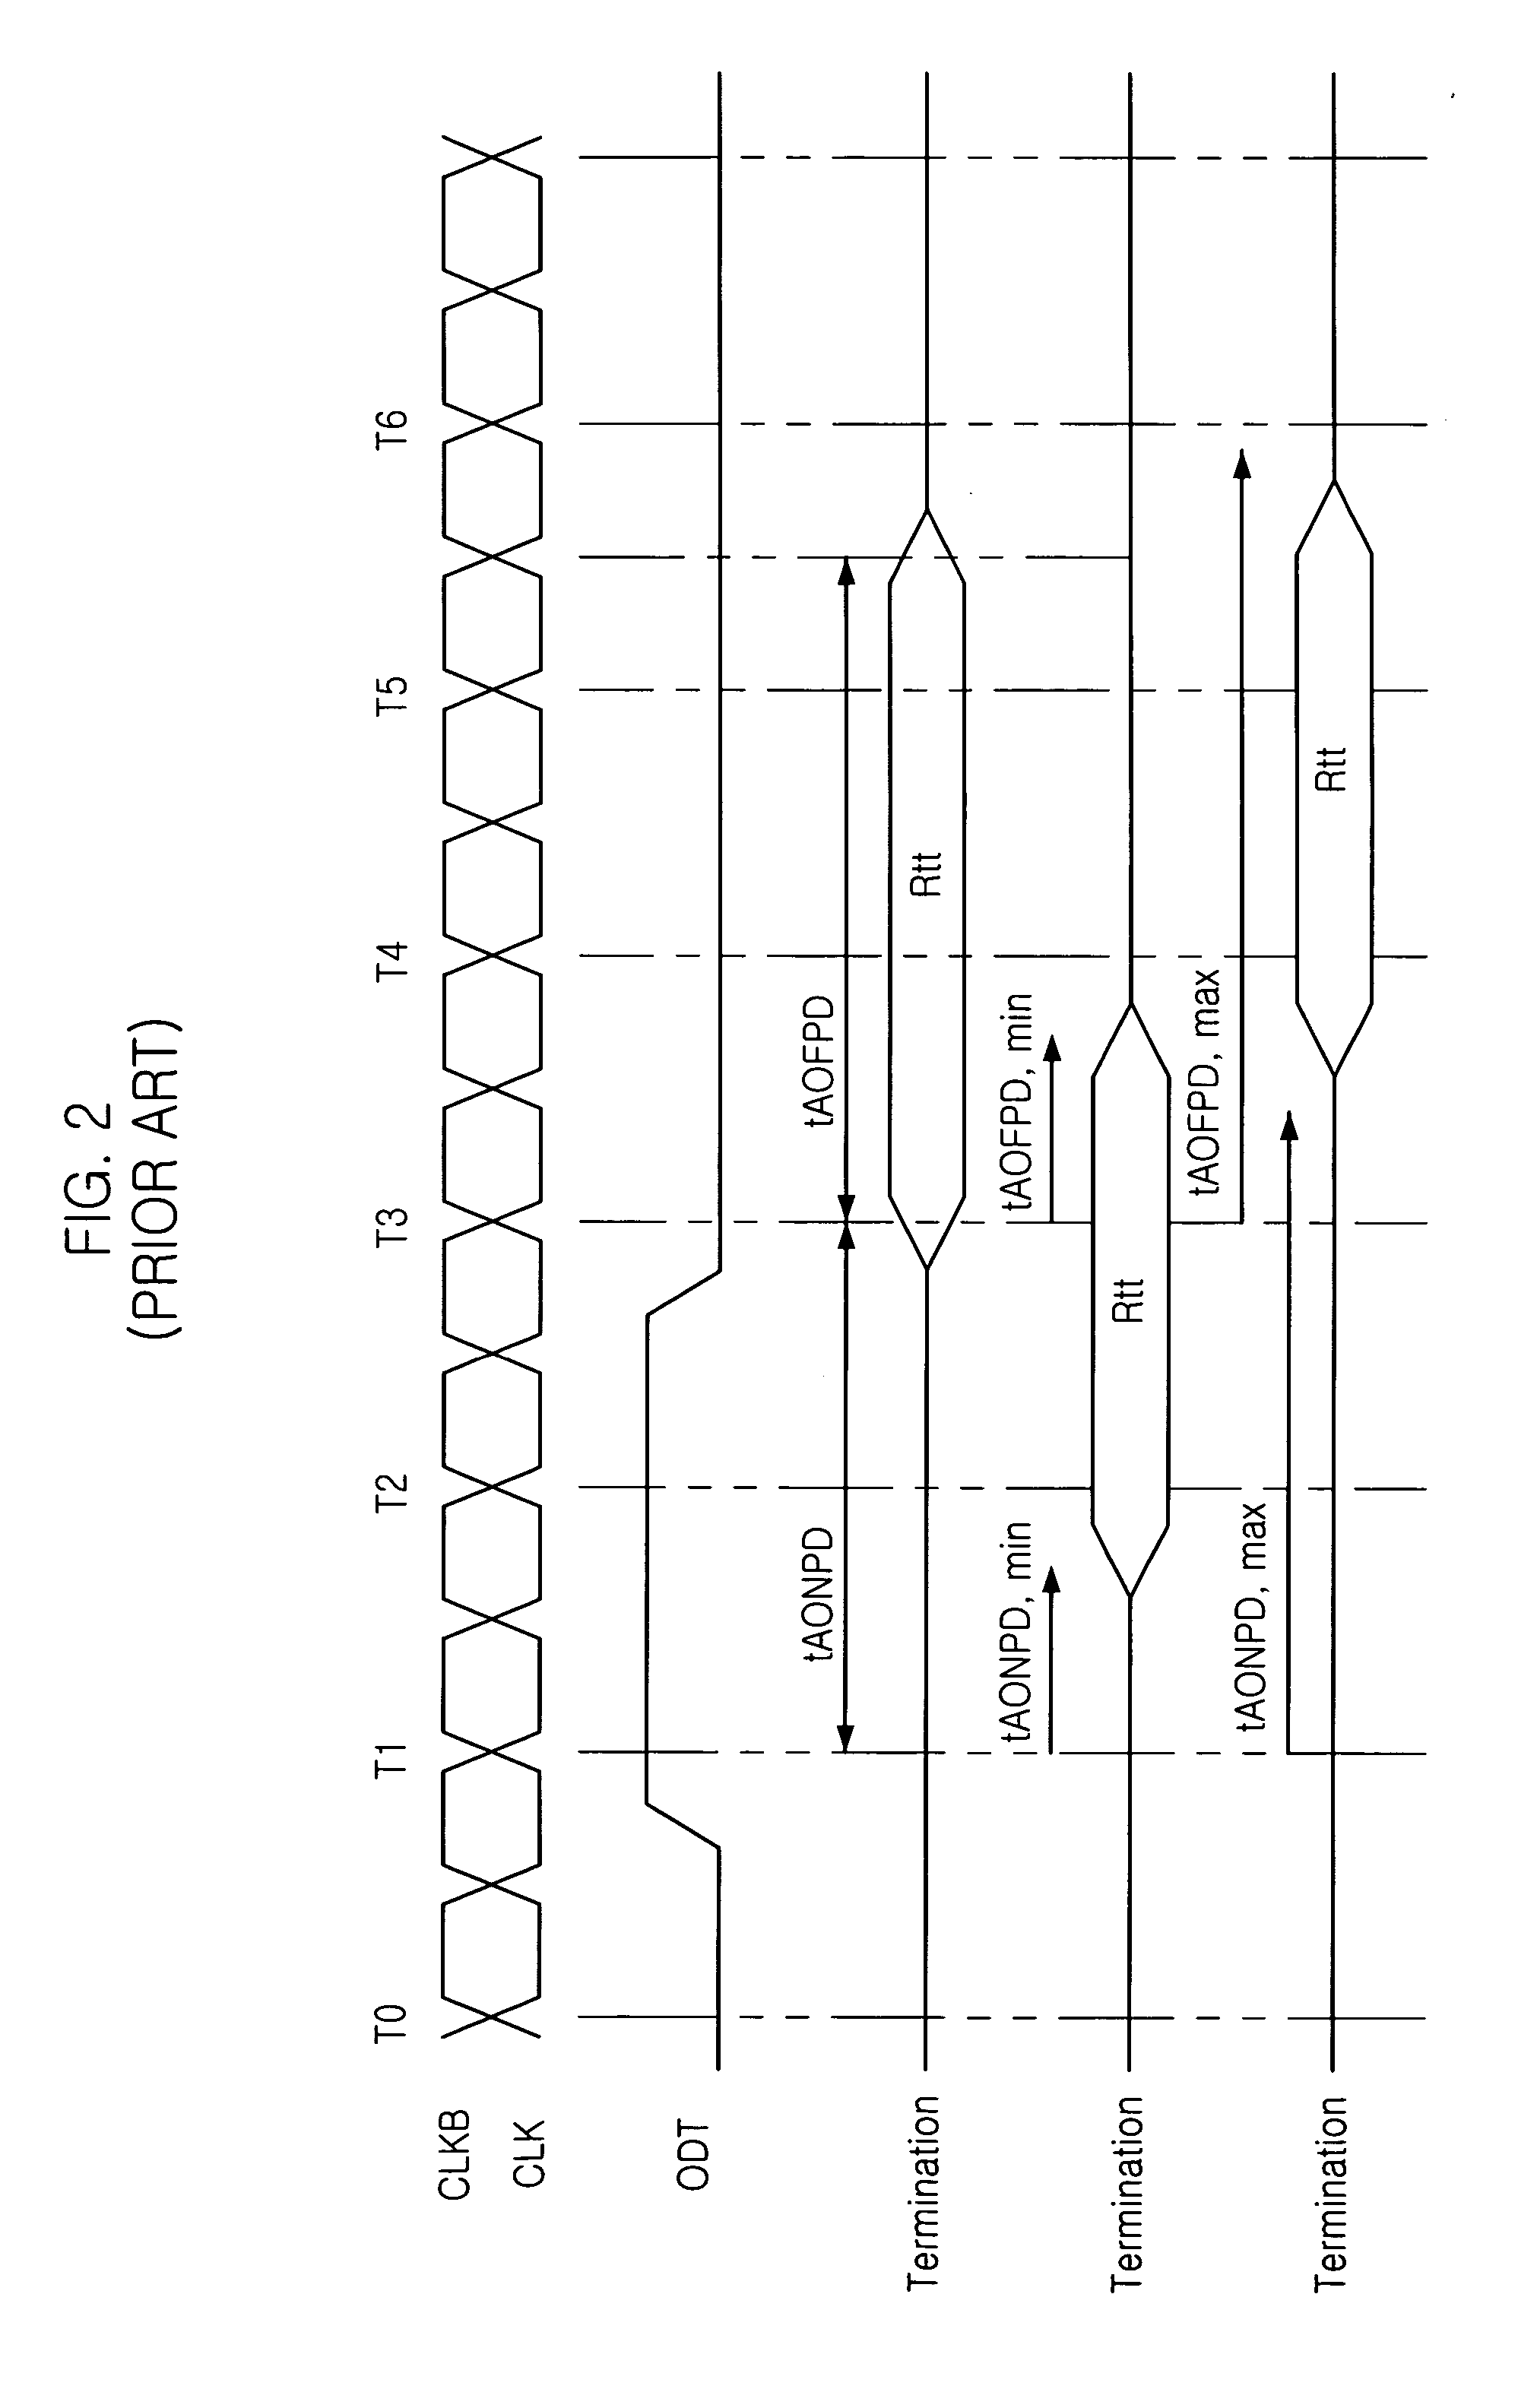 On die termination mode transfer circuit in semiconductor memory device and its method